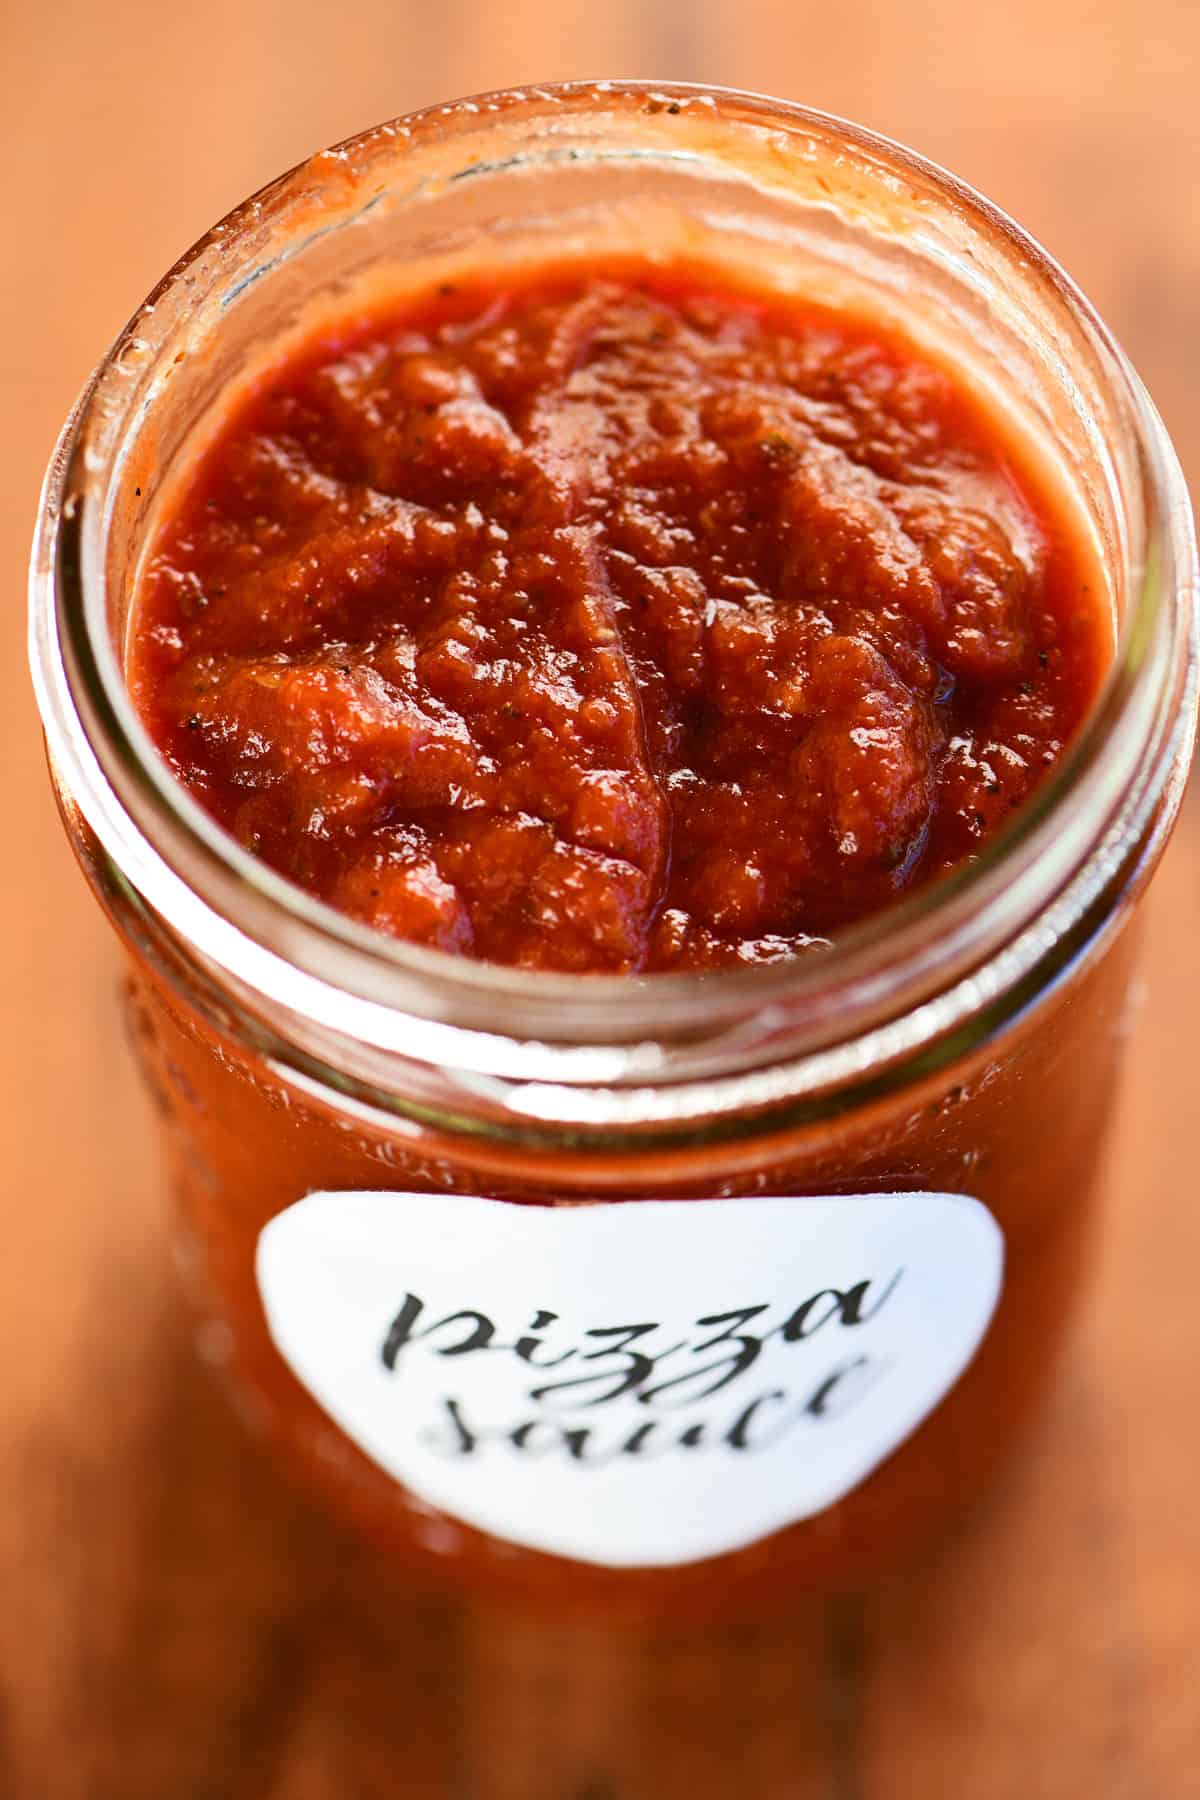 A jar with red sauce inside.